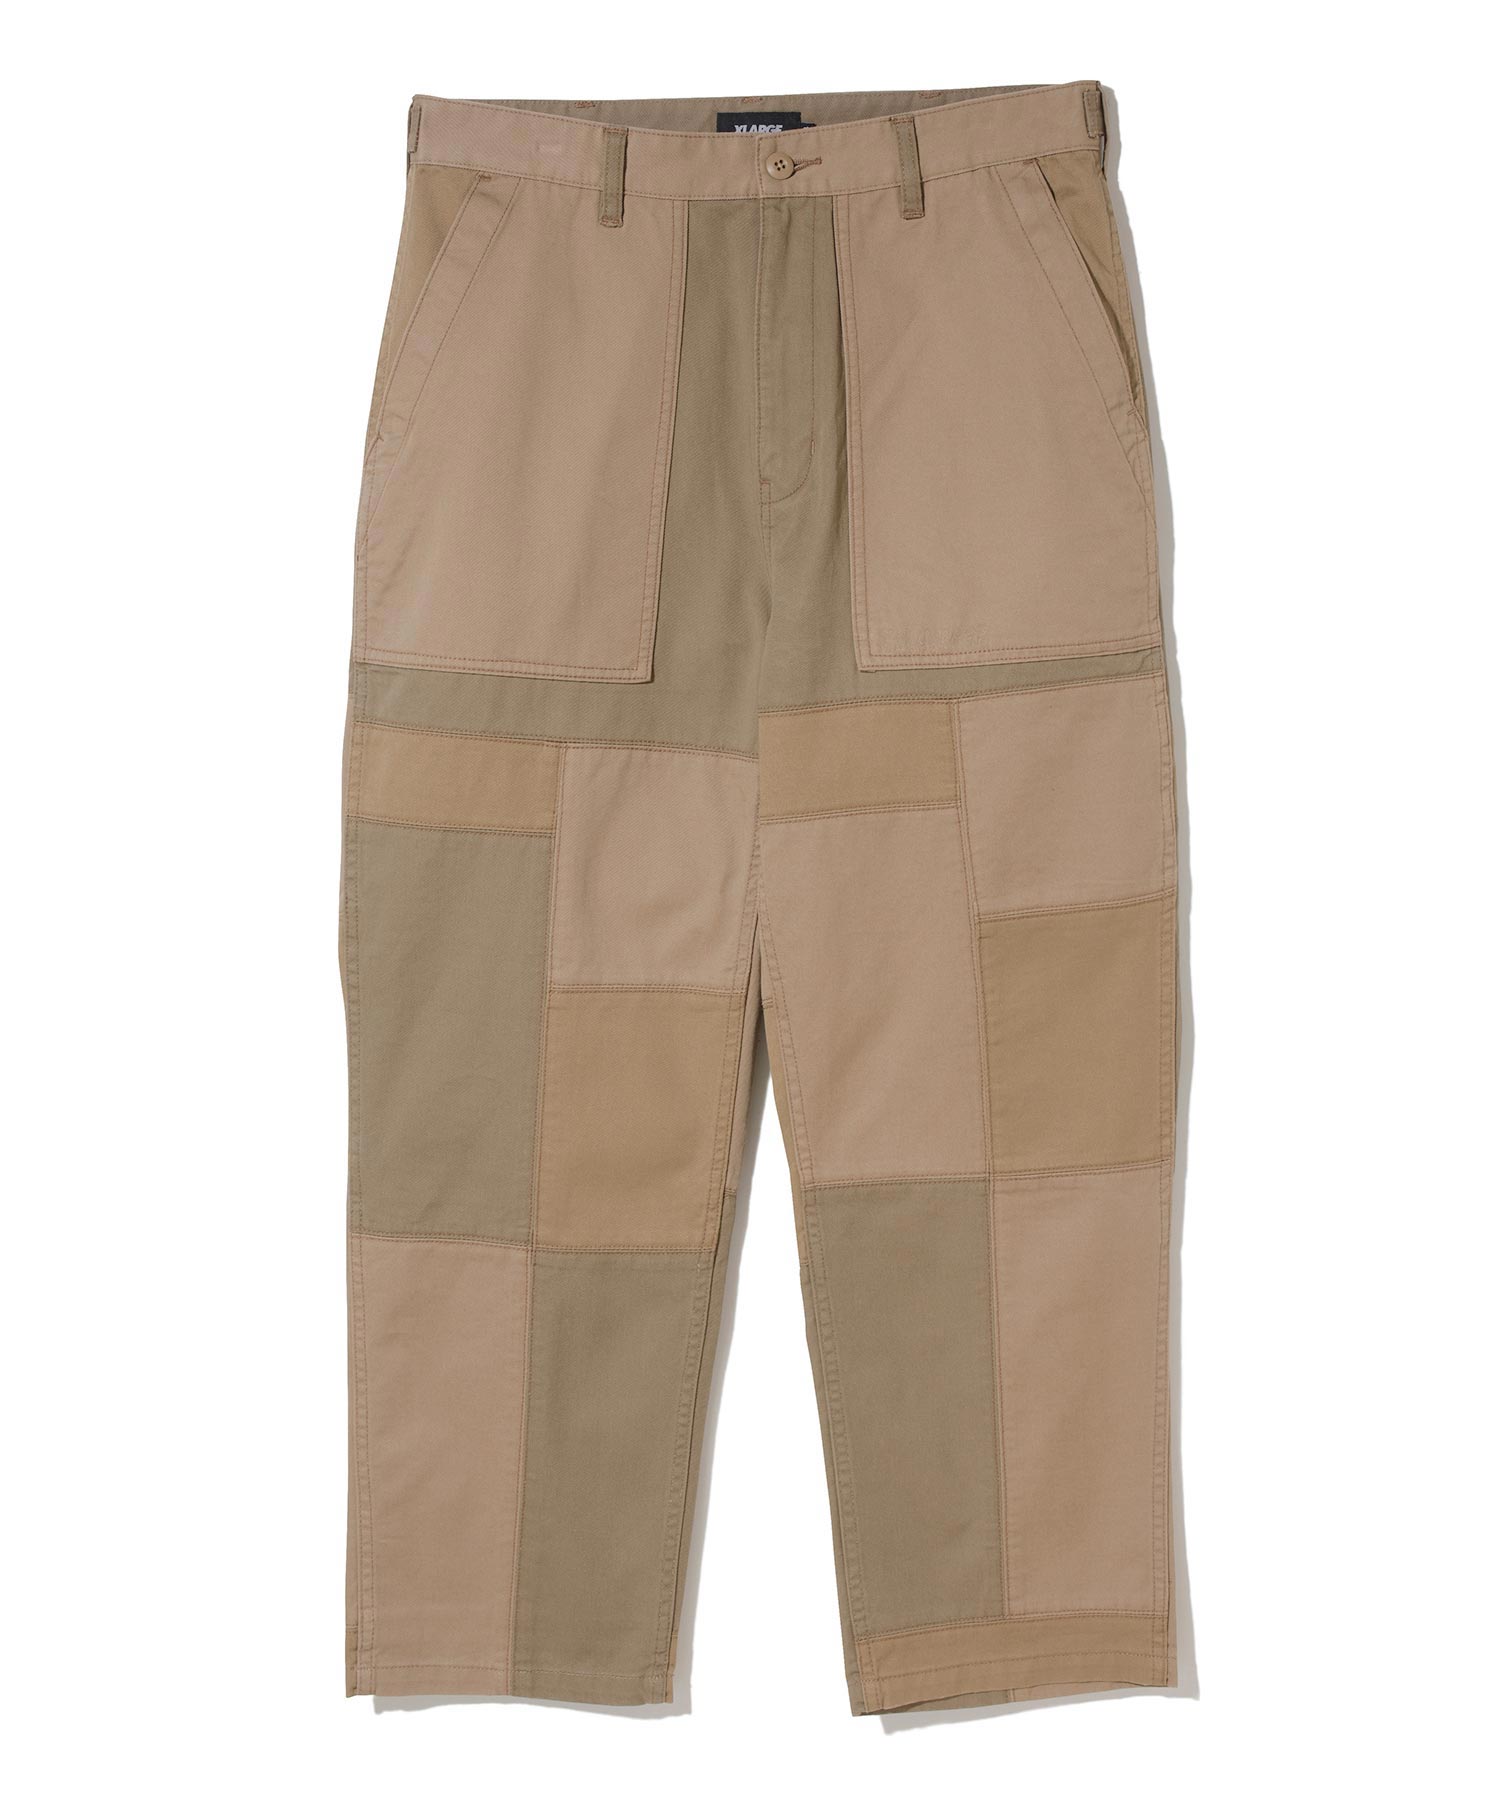 Mountain Research Patched Cargo Shorts - パンツ